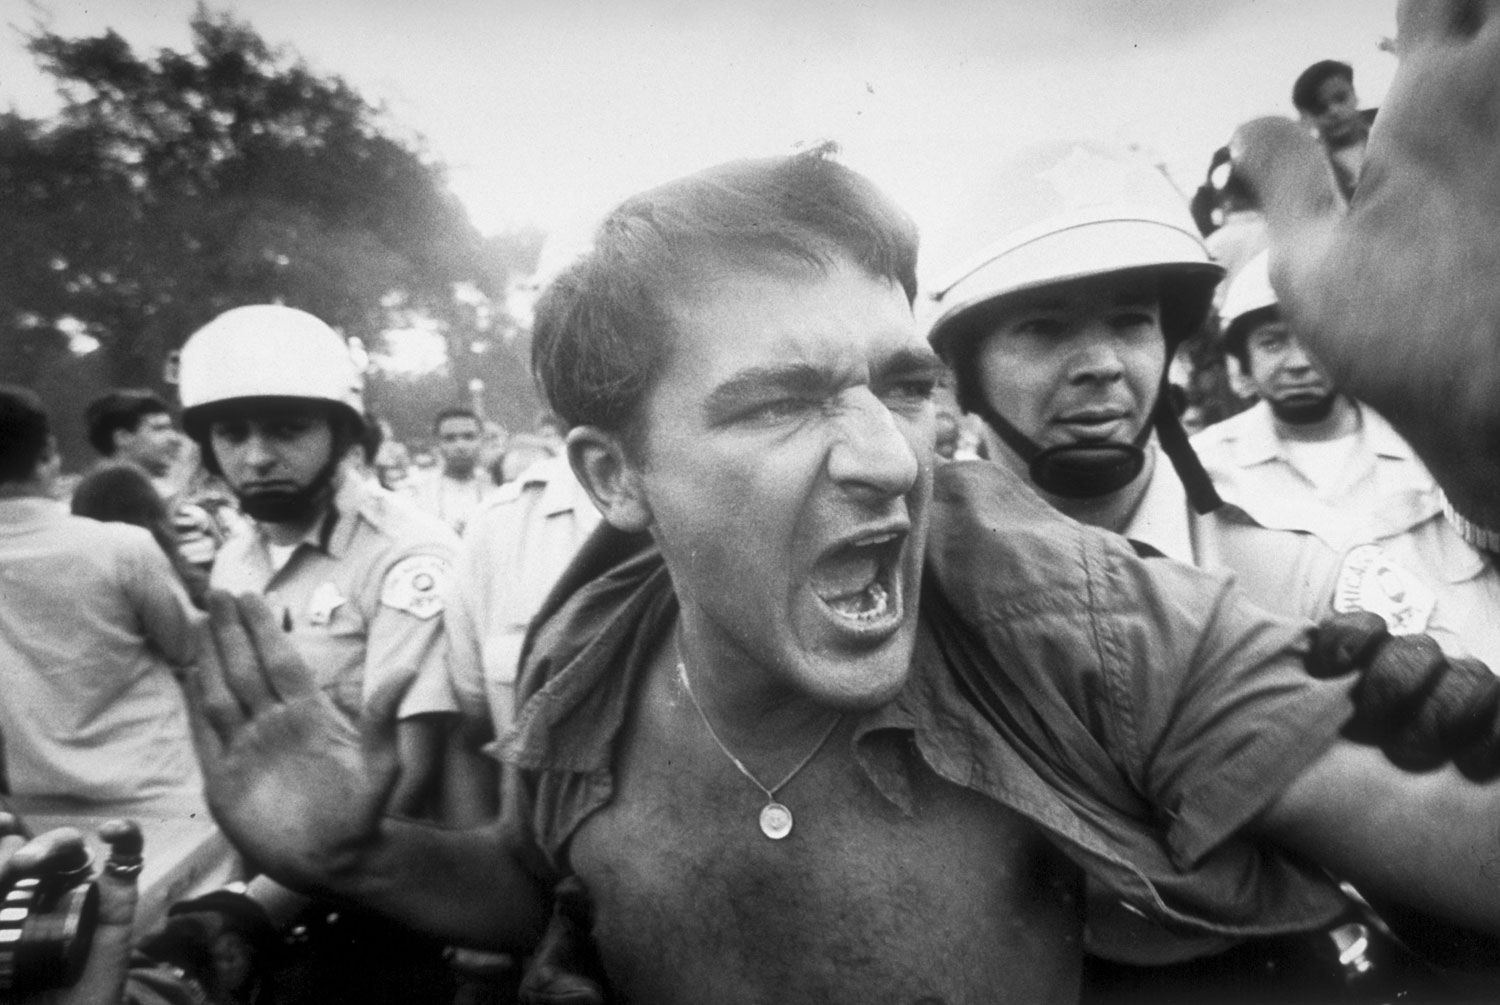 A protestor is grabbed by police during a demonstration outside the Democratic National Convention in Chicago, 1968.